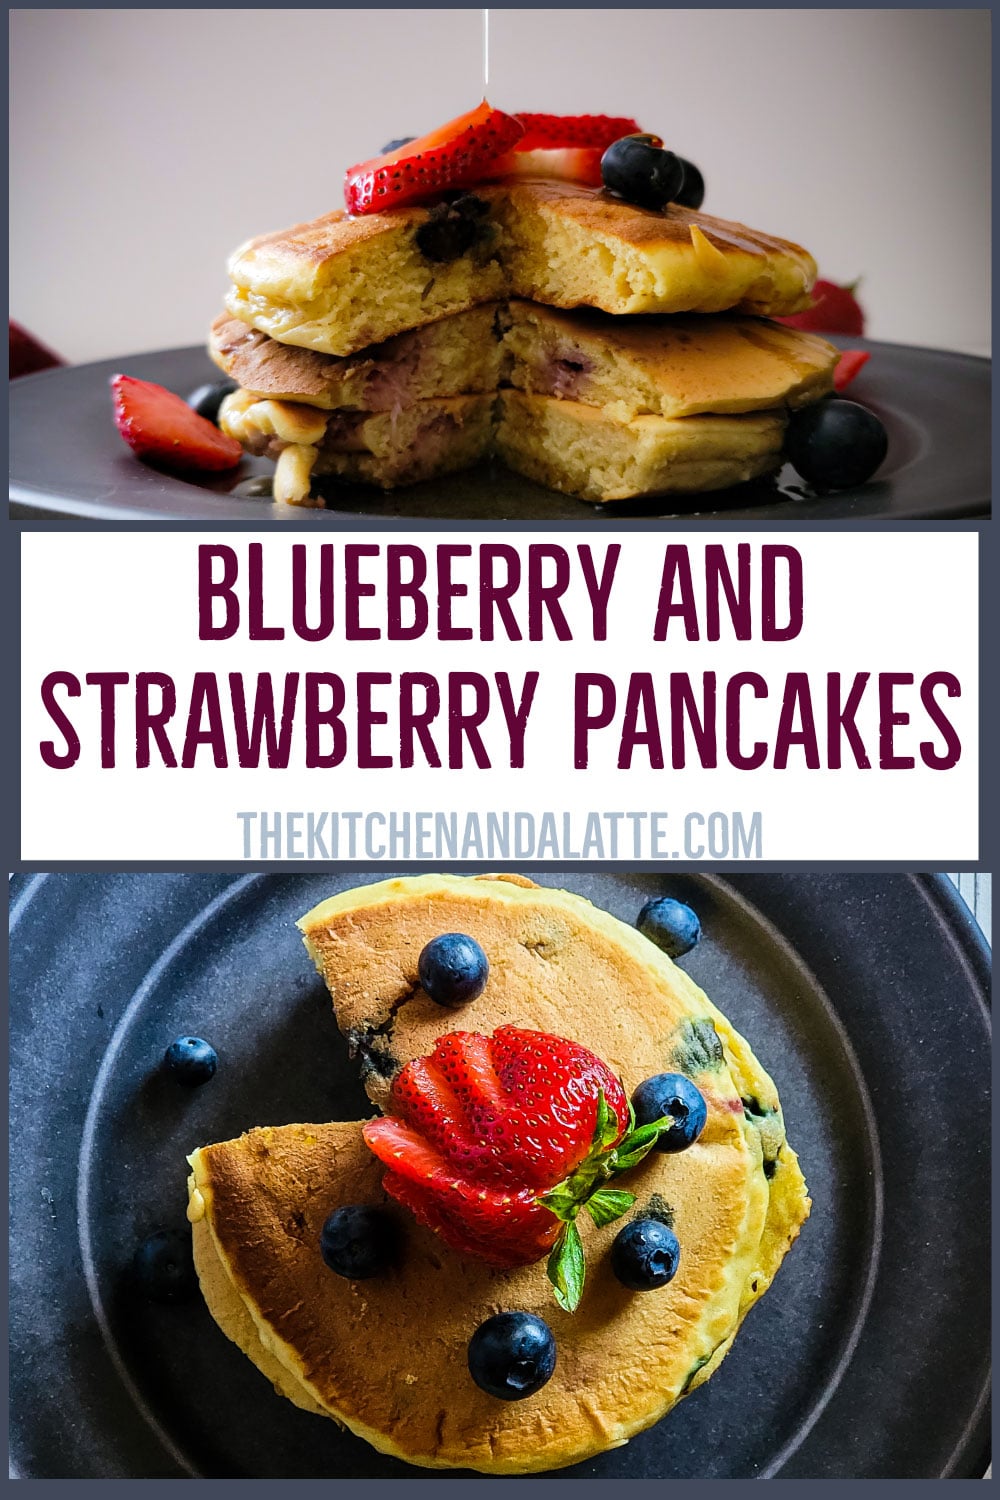 Blueberry and strawberry pancakes - Pinterest image of pancakes on a plate with blueberries and strawberries